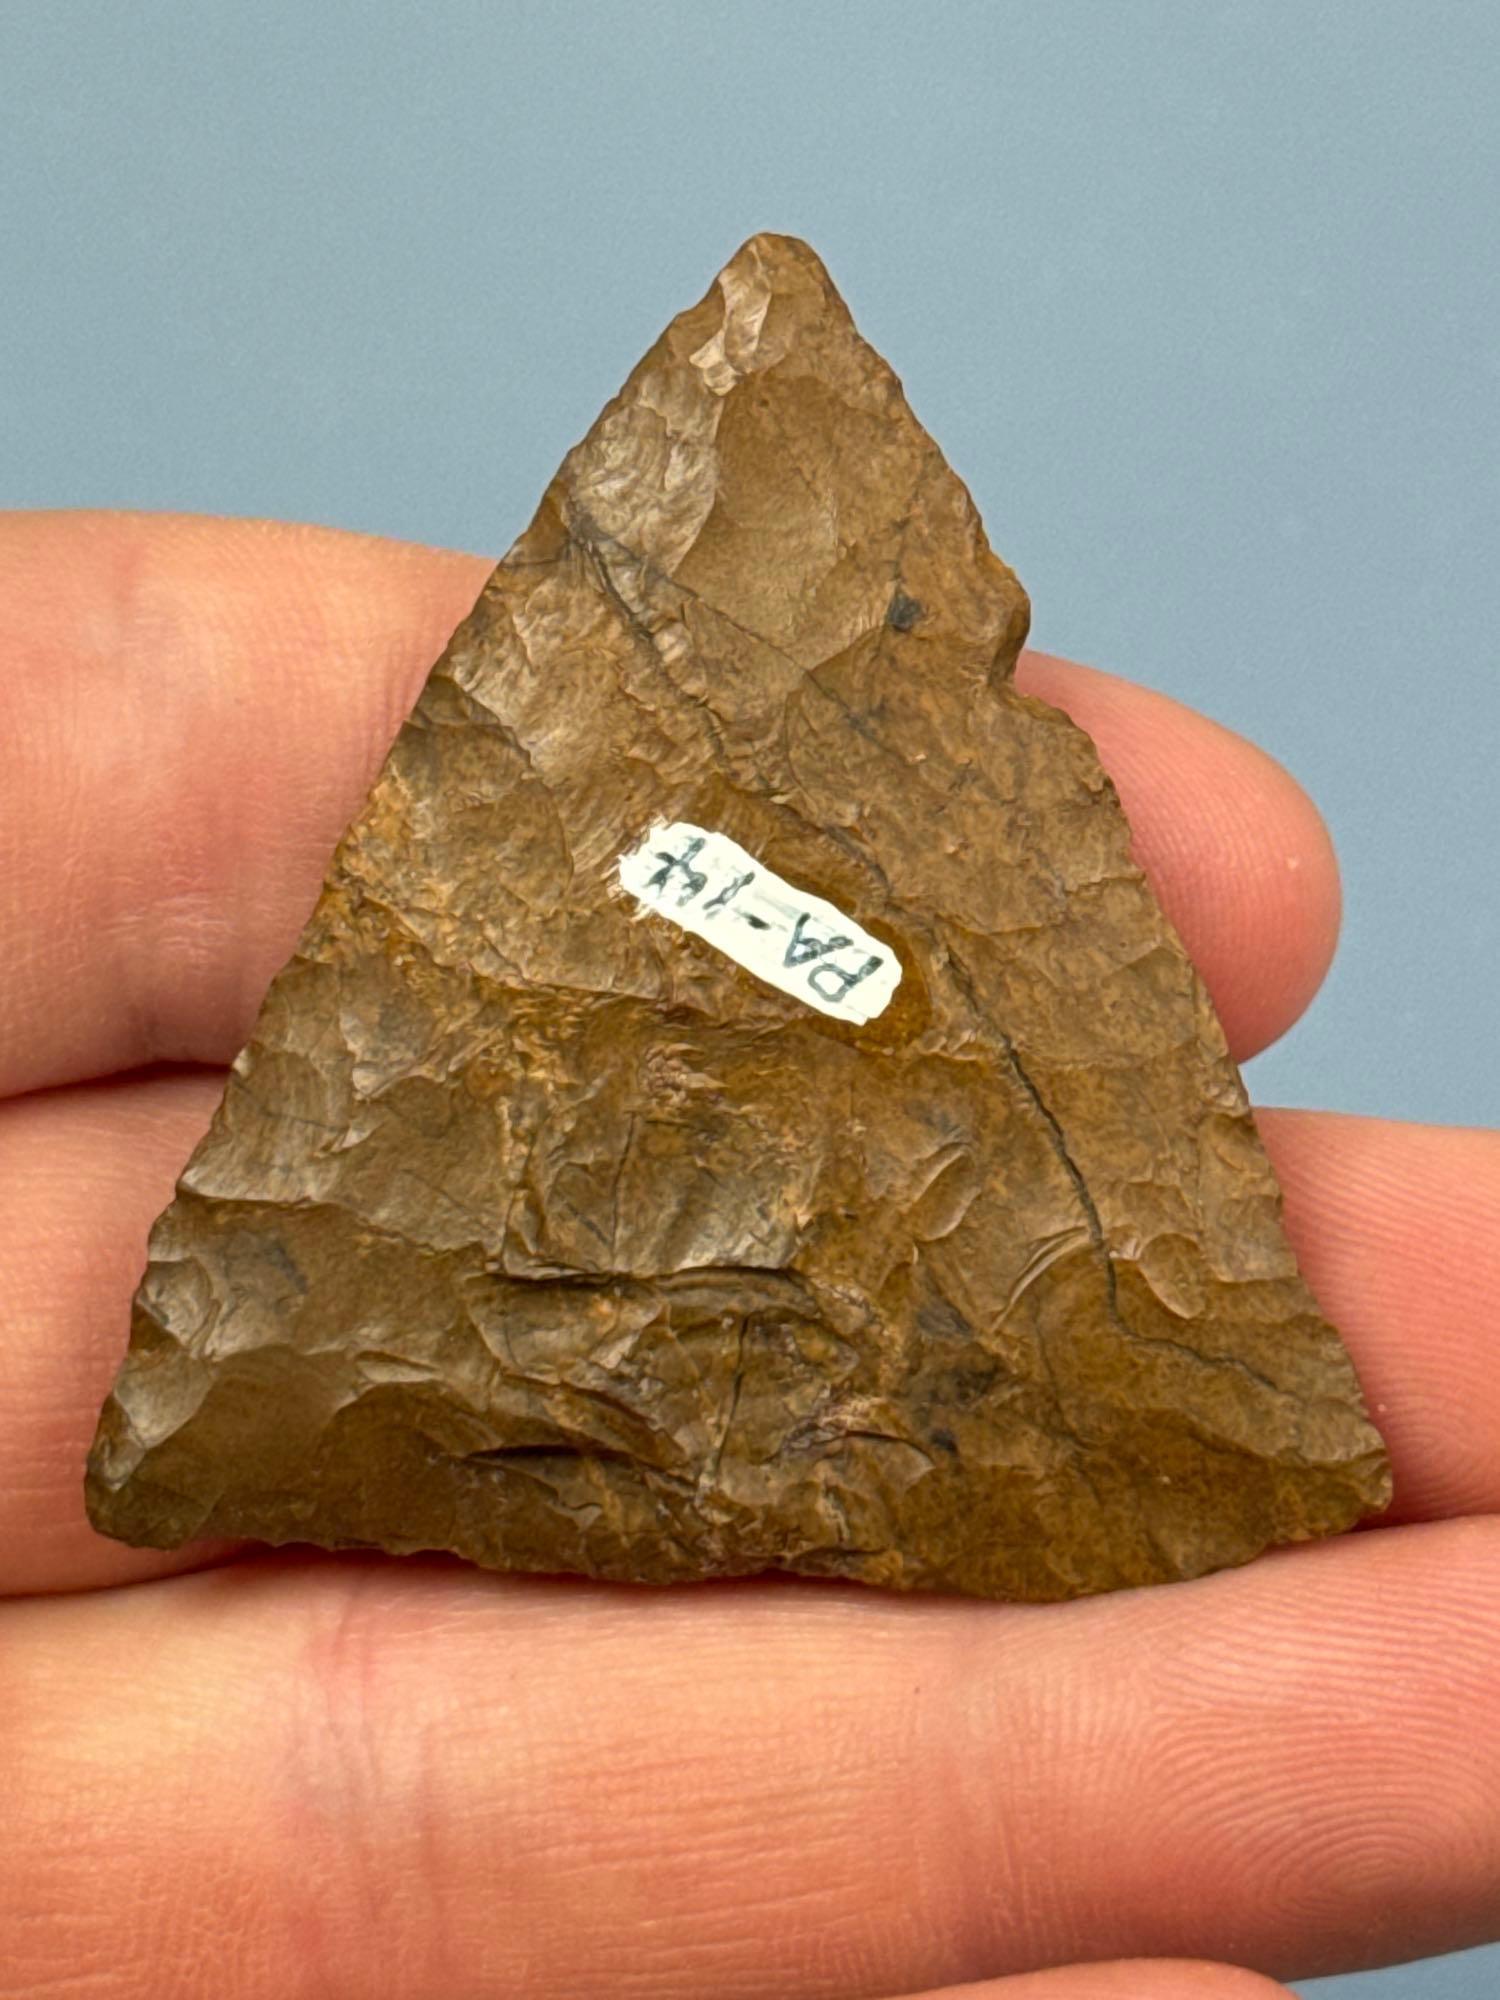 Large 2" Jasper Triangle, Found at Greenlane between Springtown and Quakertown, PA, Ex: Lemaster Col